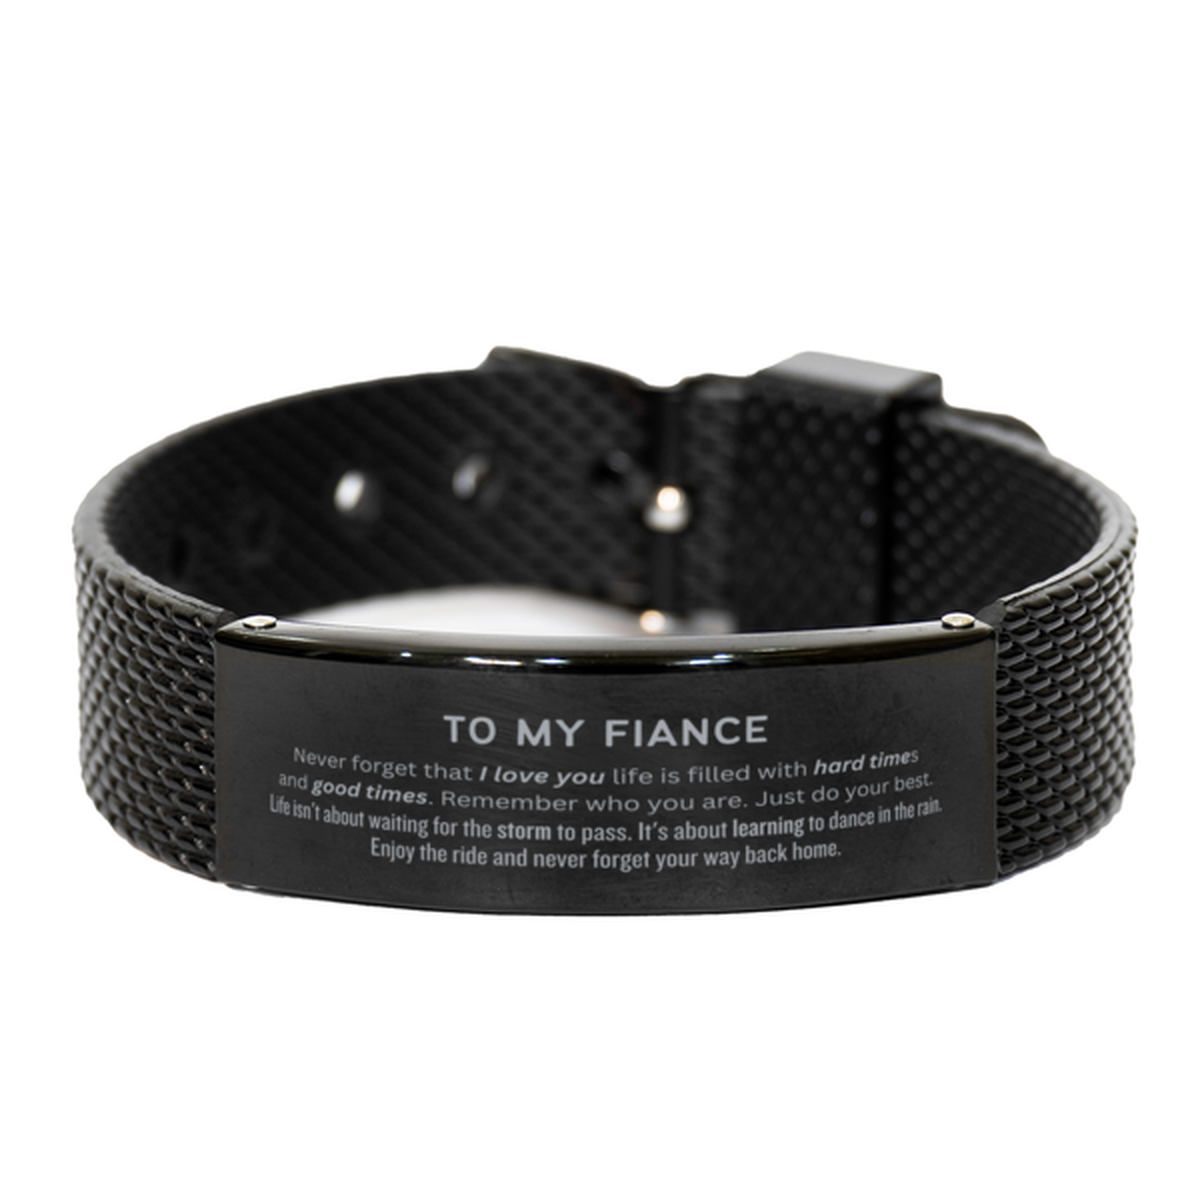 Christmas Fiance Black Shark Mesh Bracelet Gifts, To My Fiance Birthday Thank You Gifts For Fiance, Graduation Unique Gifts For Fiance To My Fiance Never forget that I love you life is filled with hard times and good times. Remember who you are. Just do y